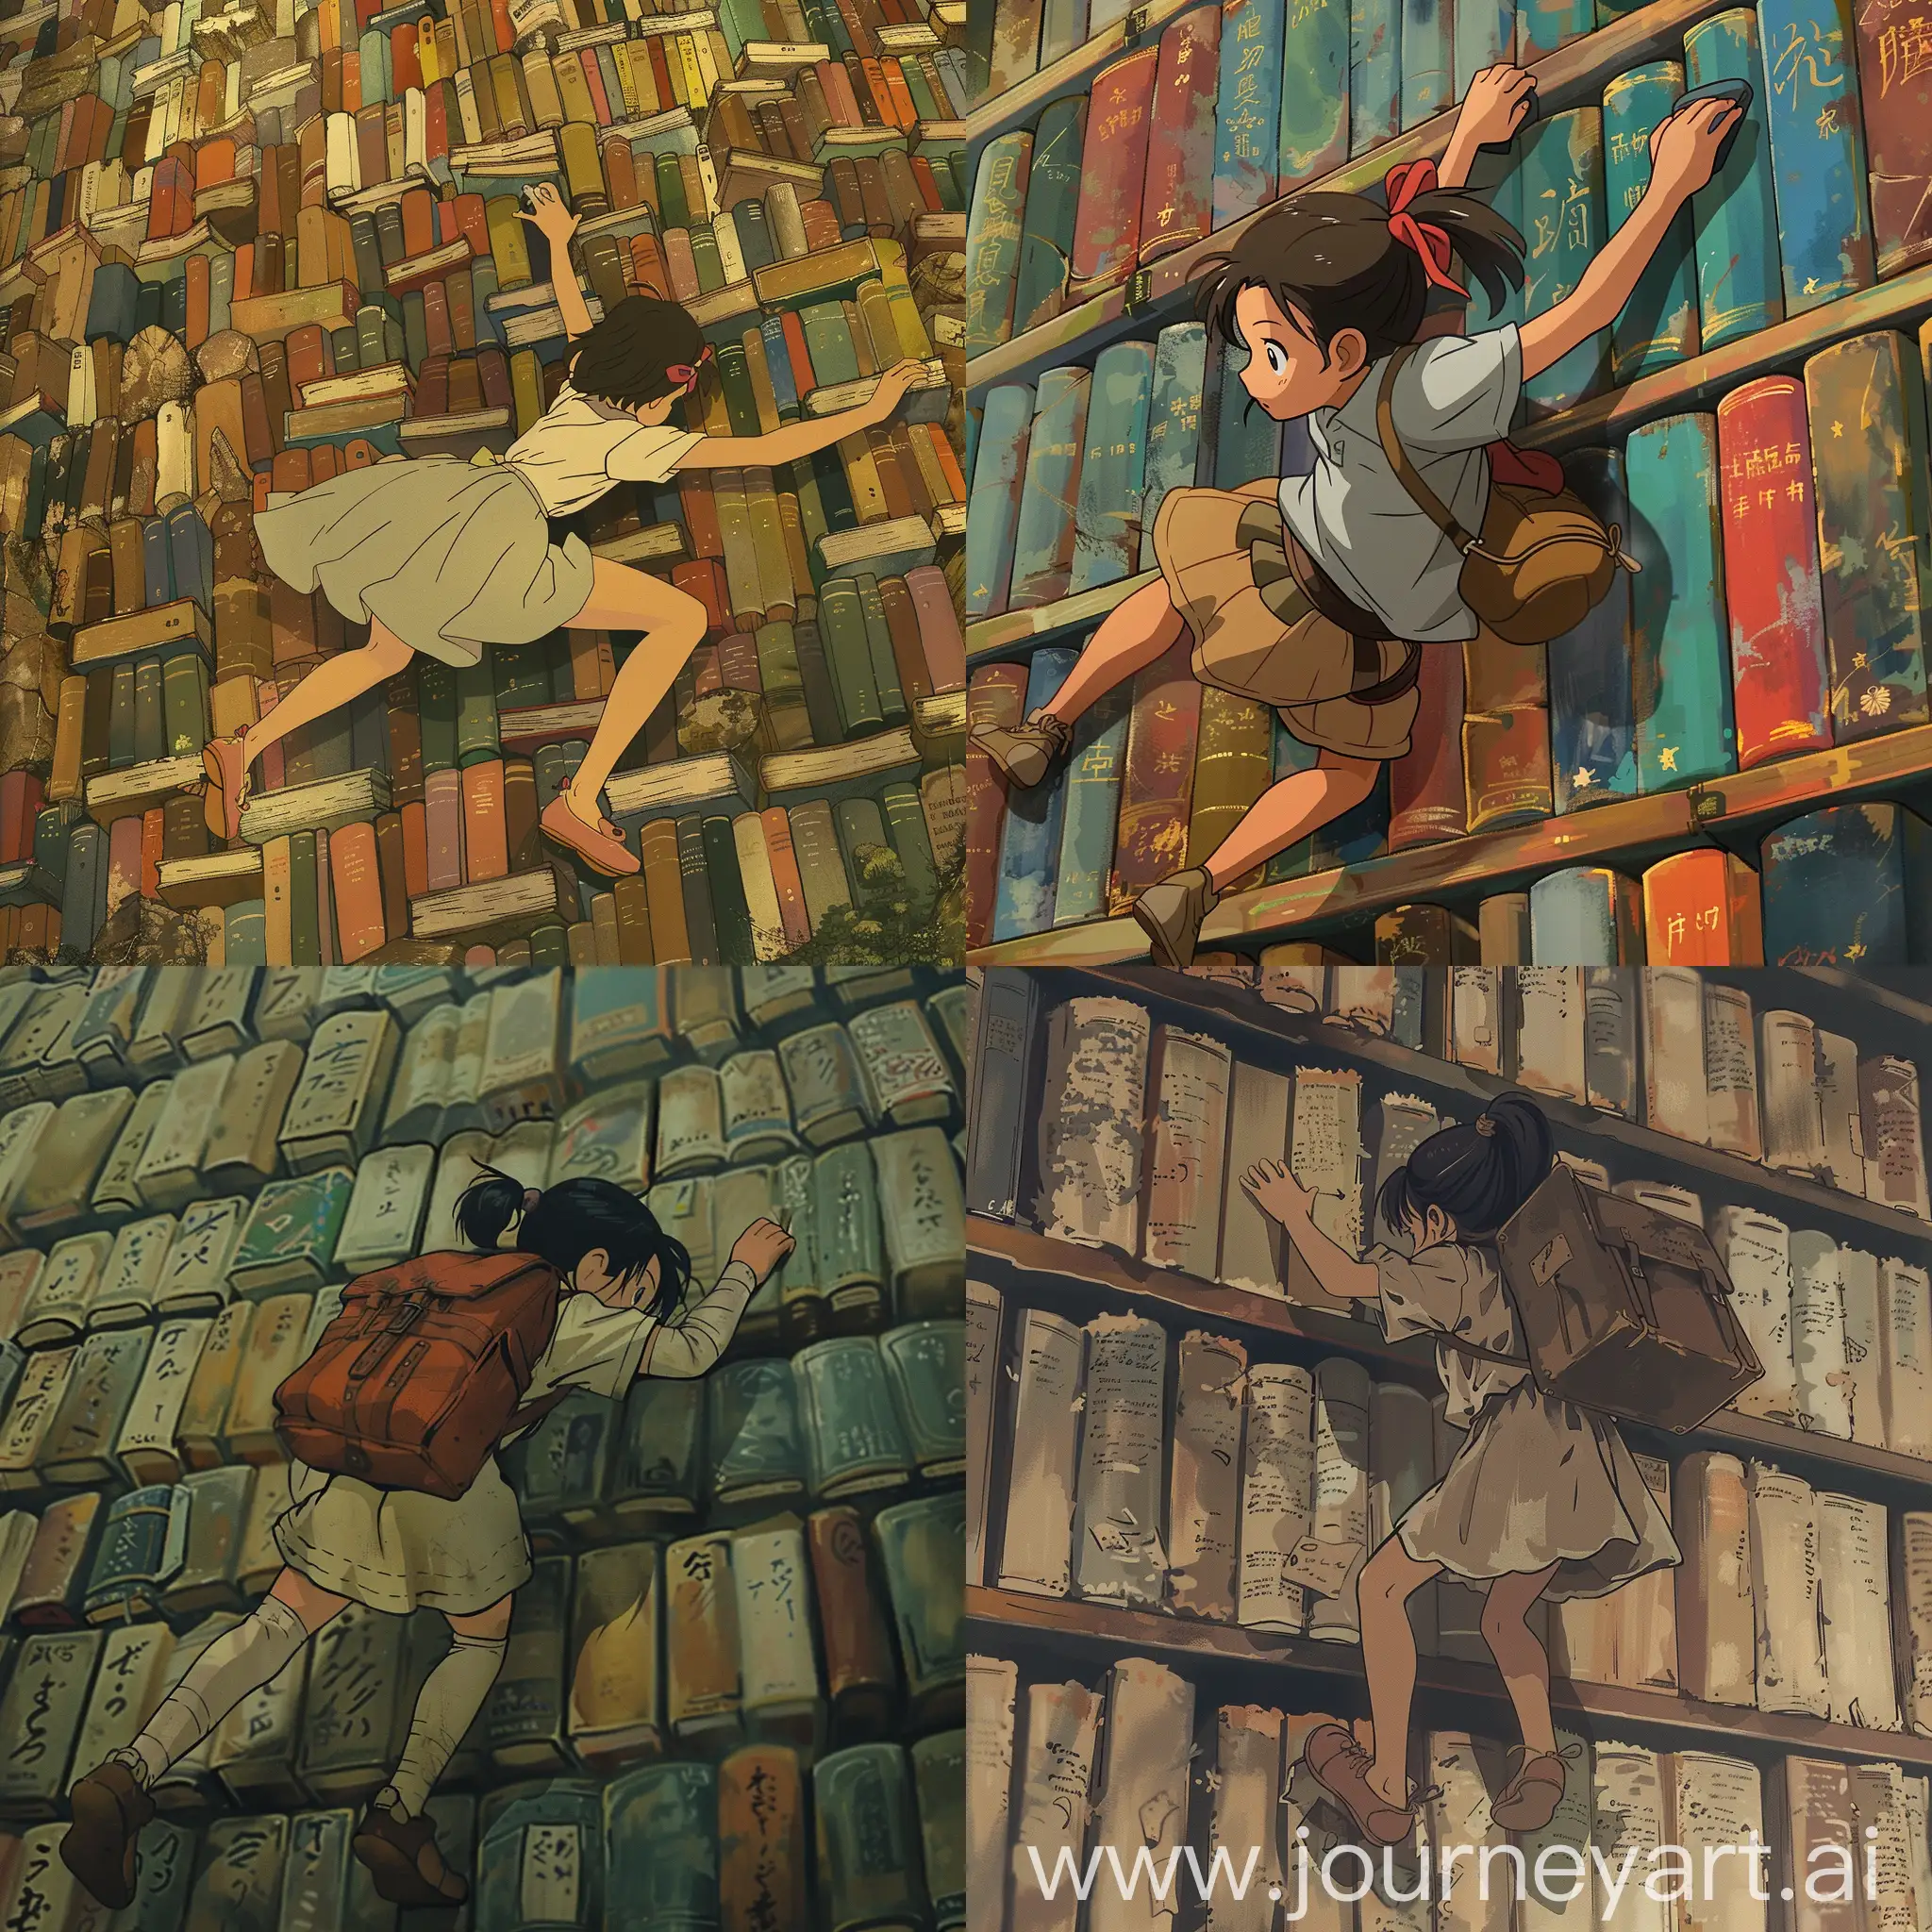 Adventurous-Young-Girl-Scaling-a-Whimsical-Book-Wall-in-Miyazakiinspired-Style